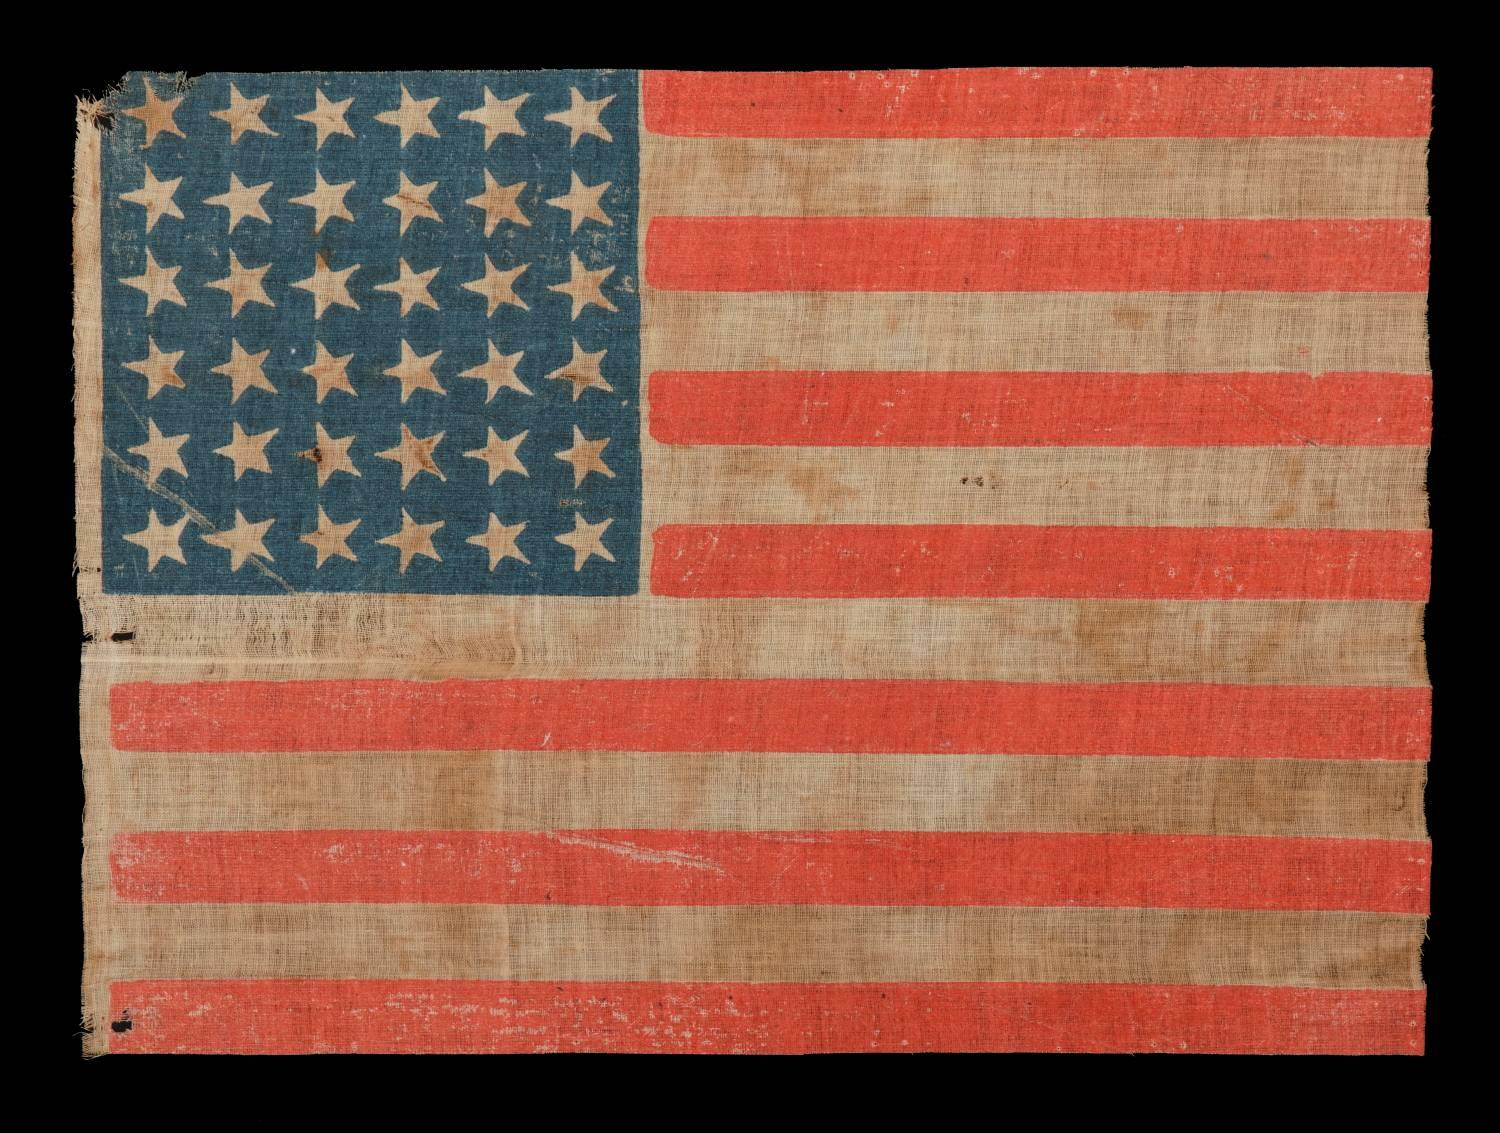 36 star antique American Parade flag of the Civil War era, an attractive example with endearing wear, nice colors and canted stars, 1864-67, Nevada Statehood:

 36 star American national flag of the Civil War era, printed on coarse, glazed cotton.